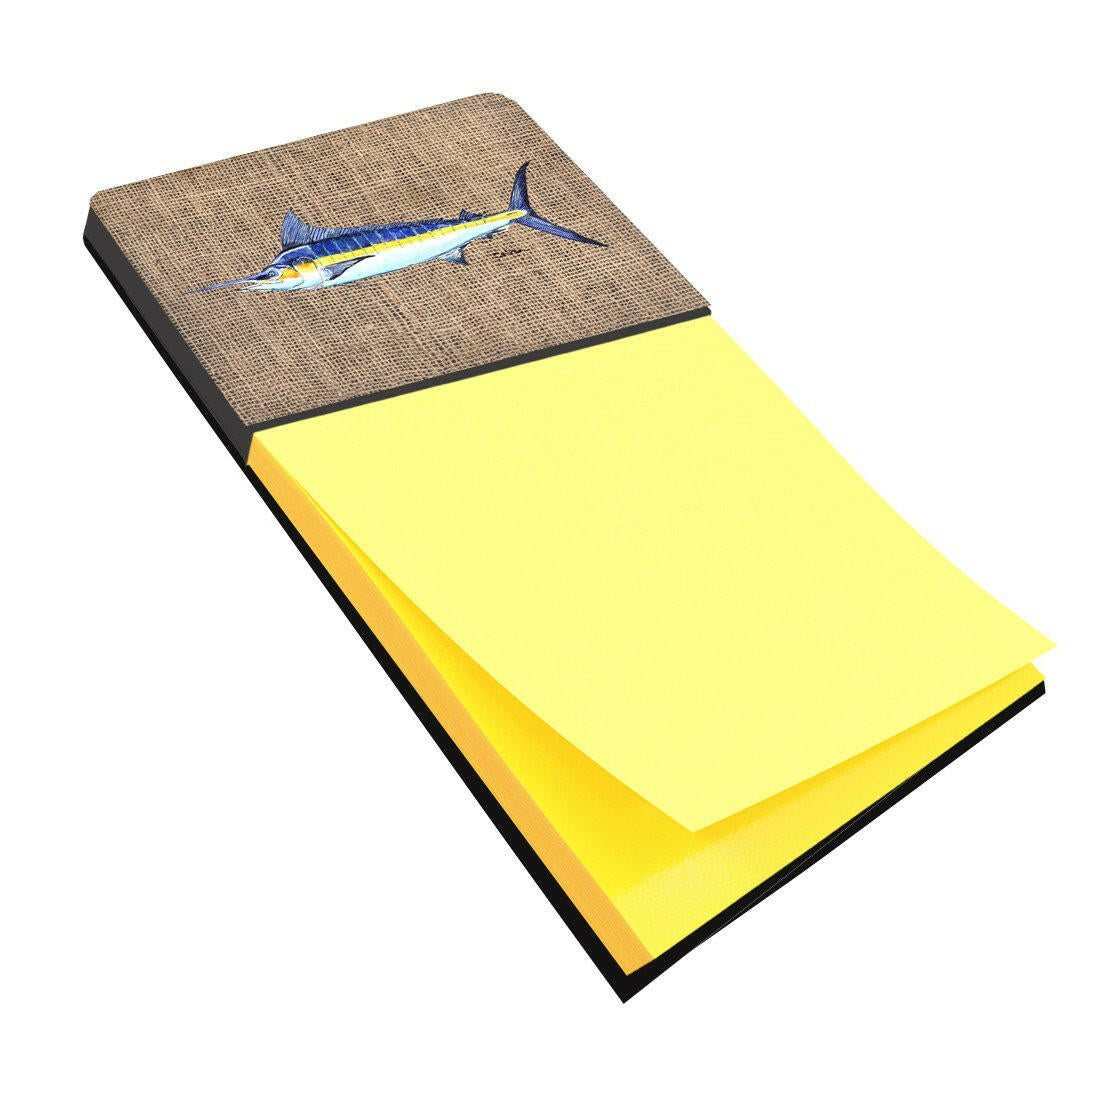 Fish - Marlin Refiillable Sticky Note Holder or Postit Note Dispenser 8773SN by Caroline&#39;s Treasures